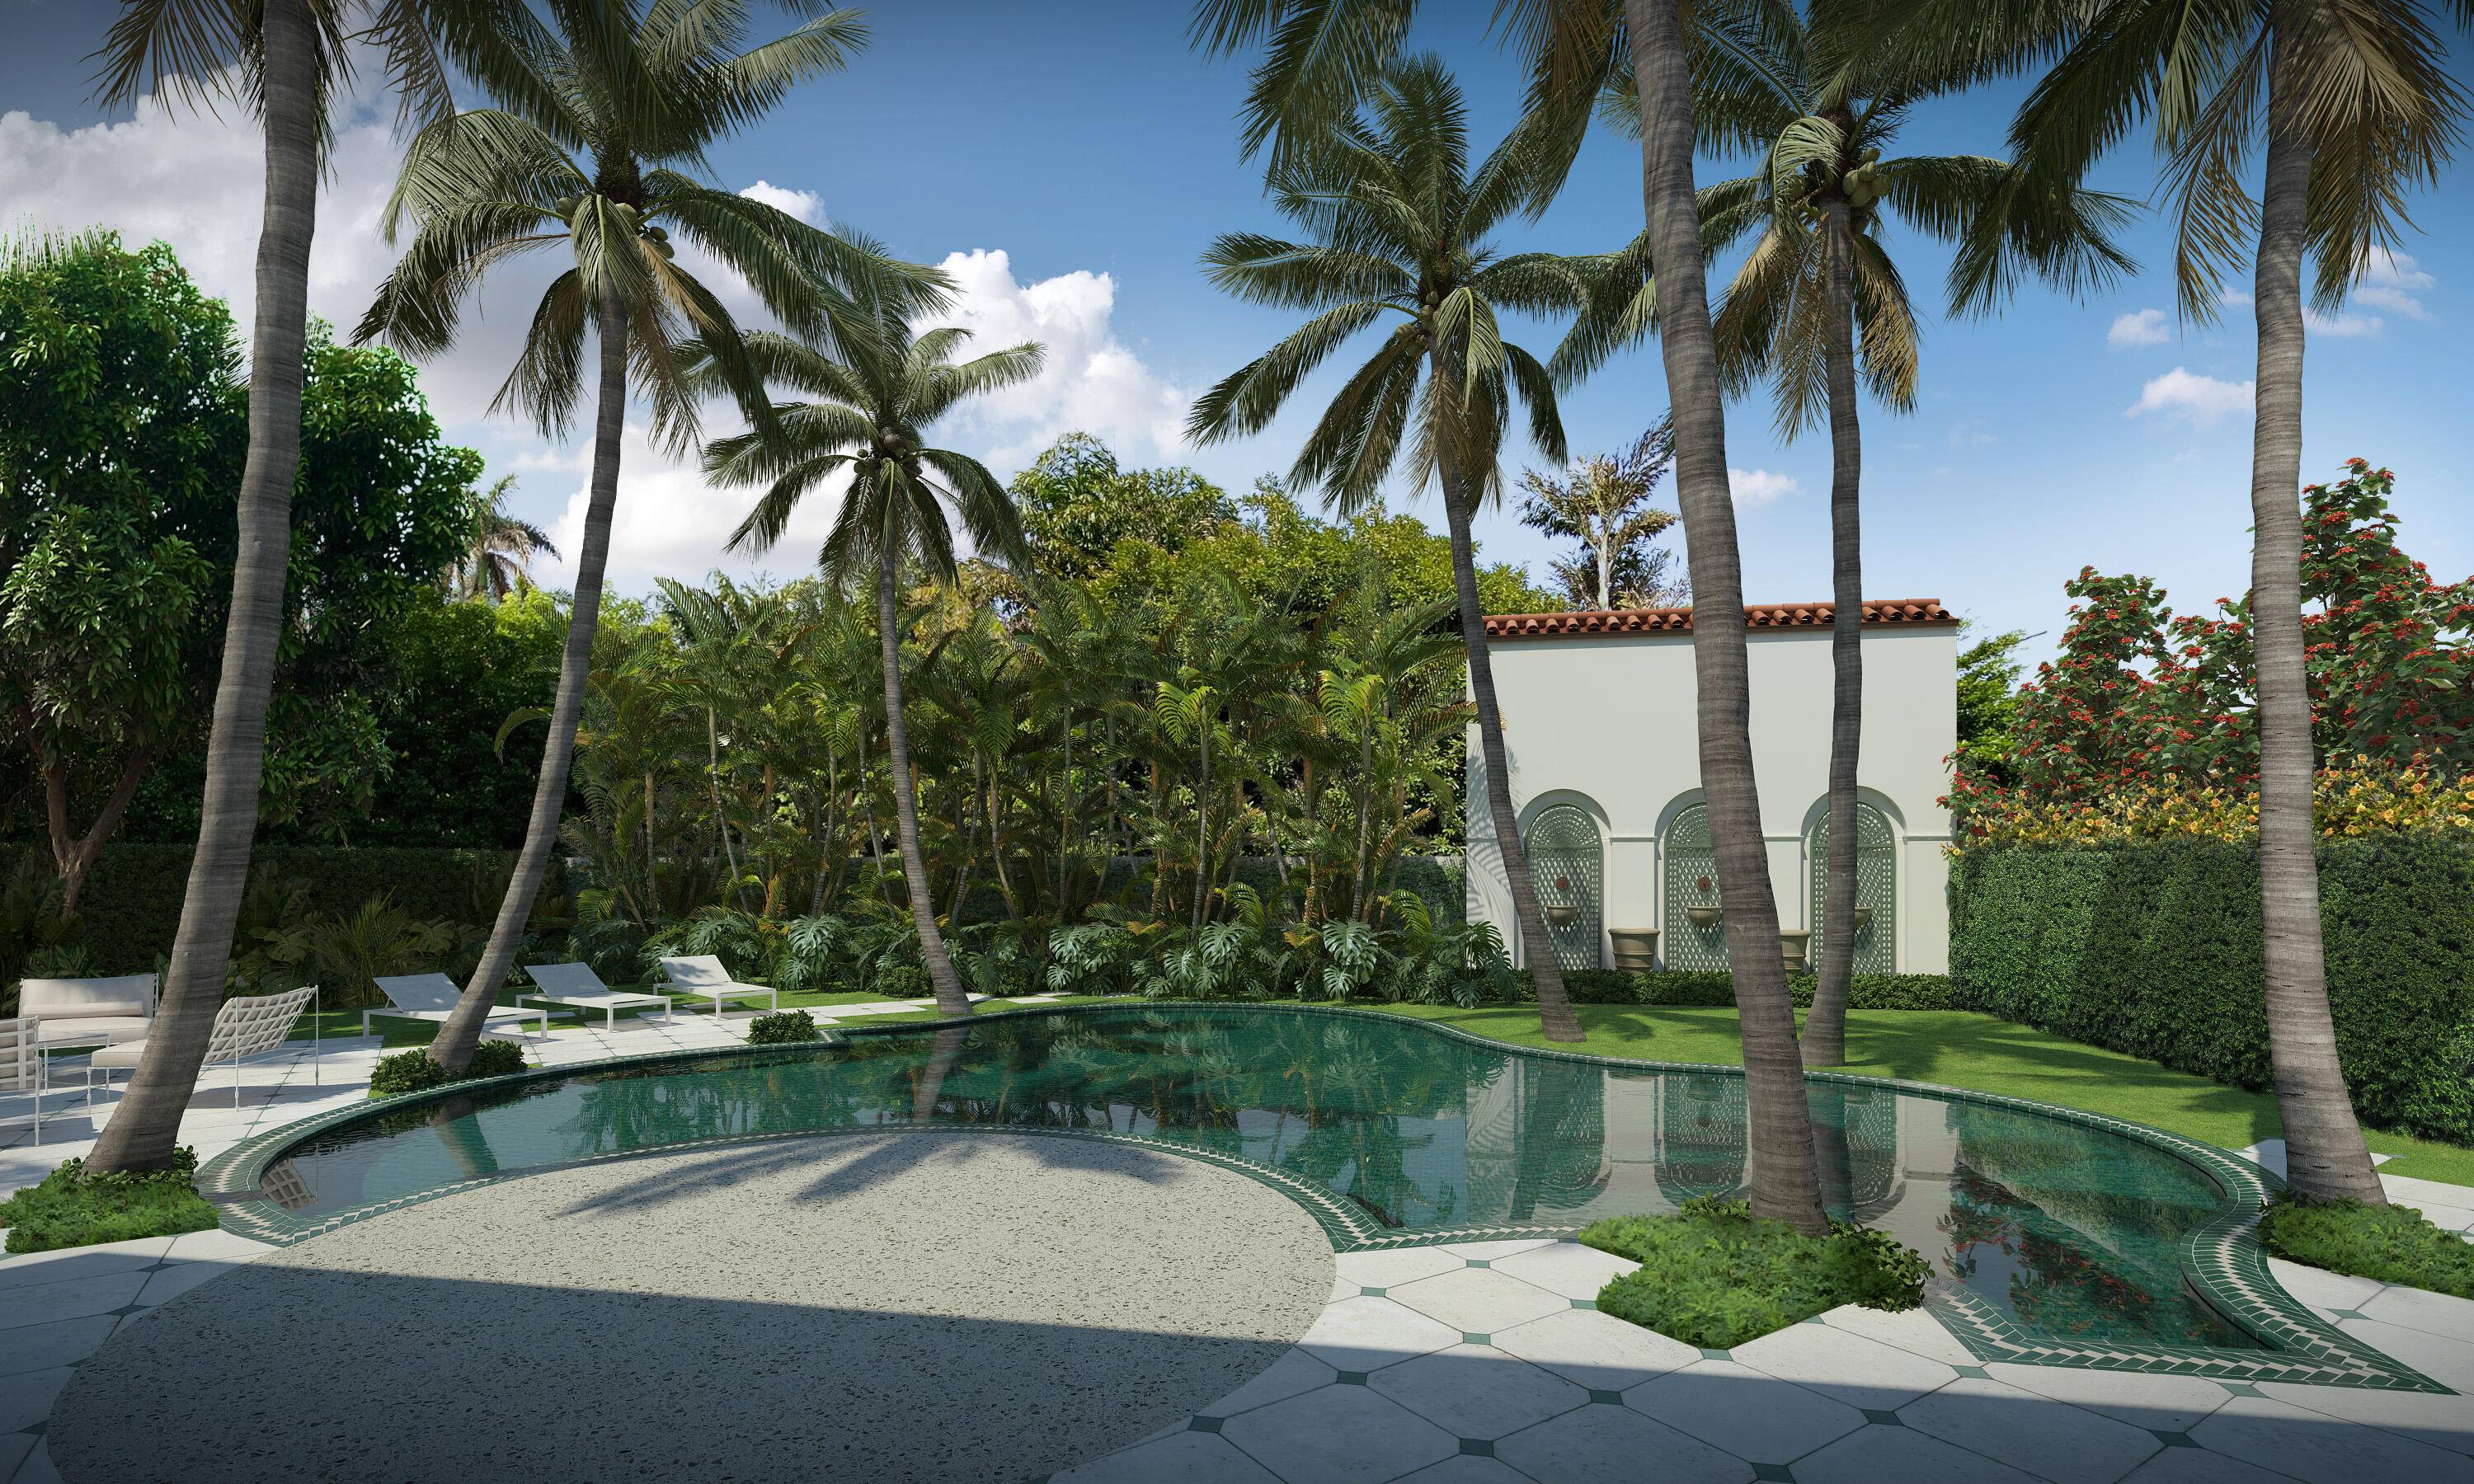 A once in a lifetime opportunity for discerning buyers to own one of the most architecturally significant properties on the Island of Palm Beach.